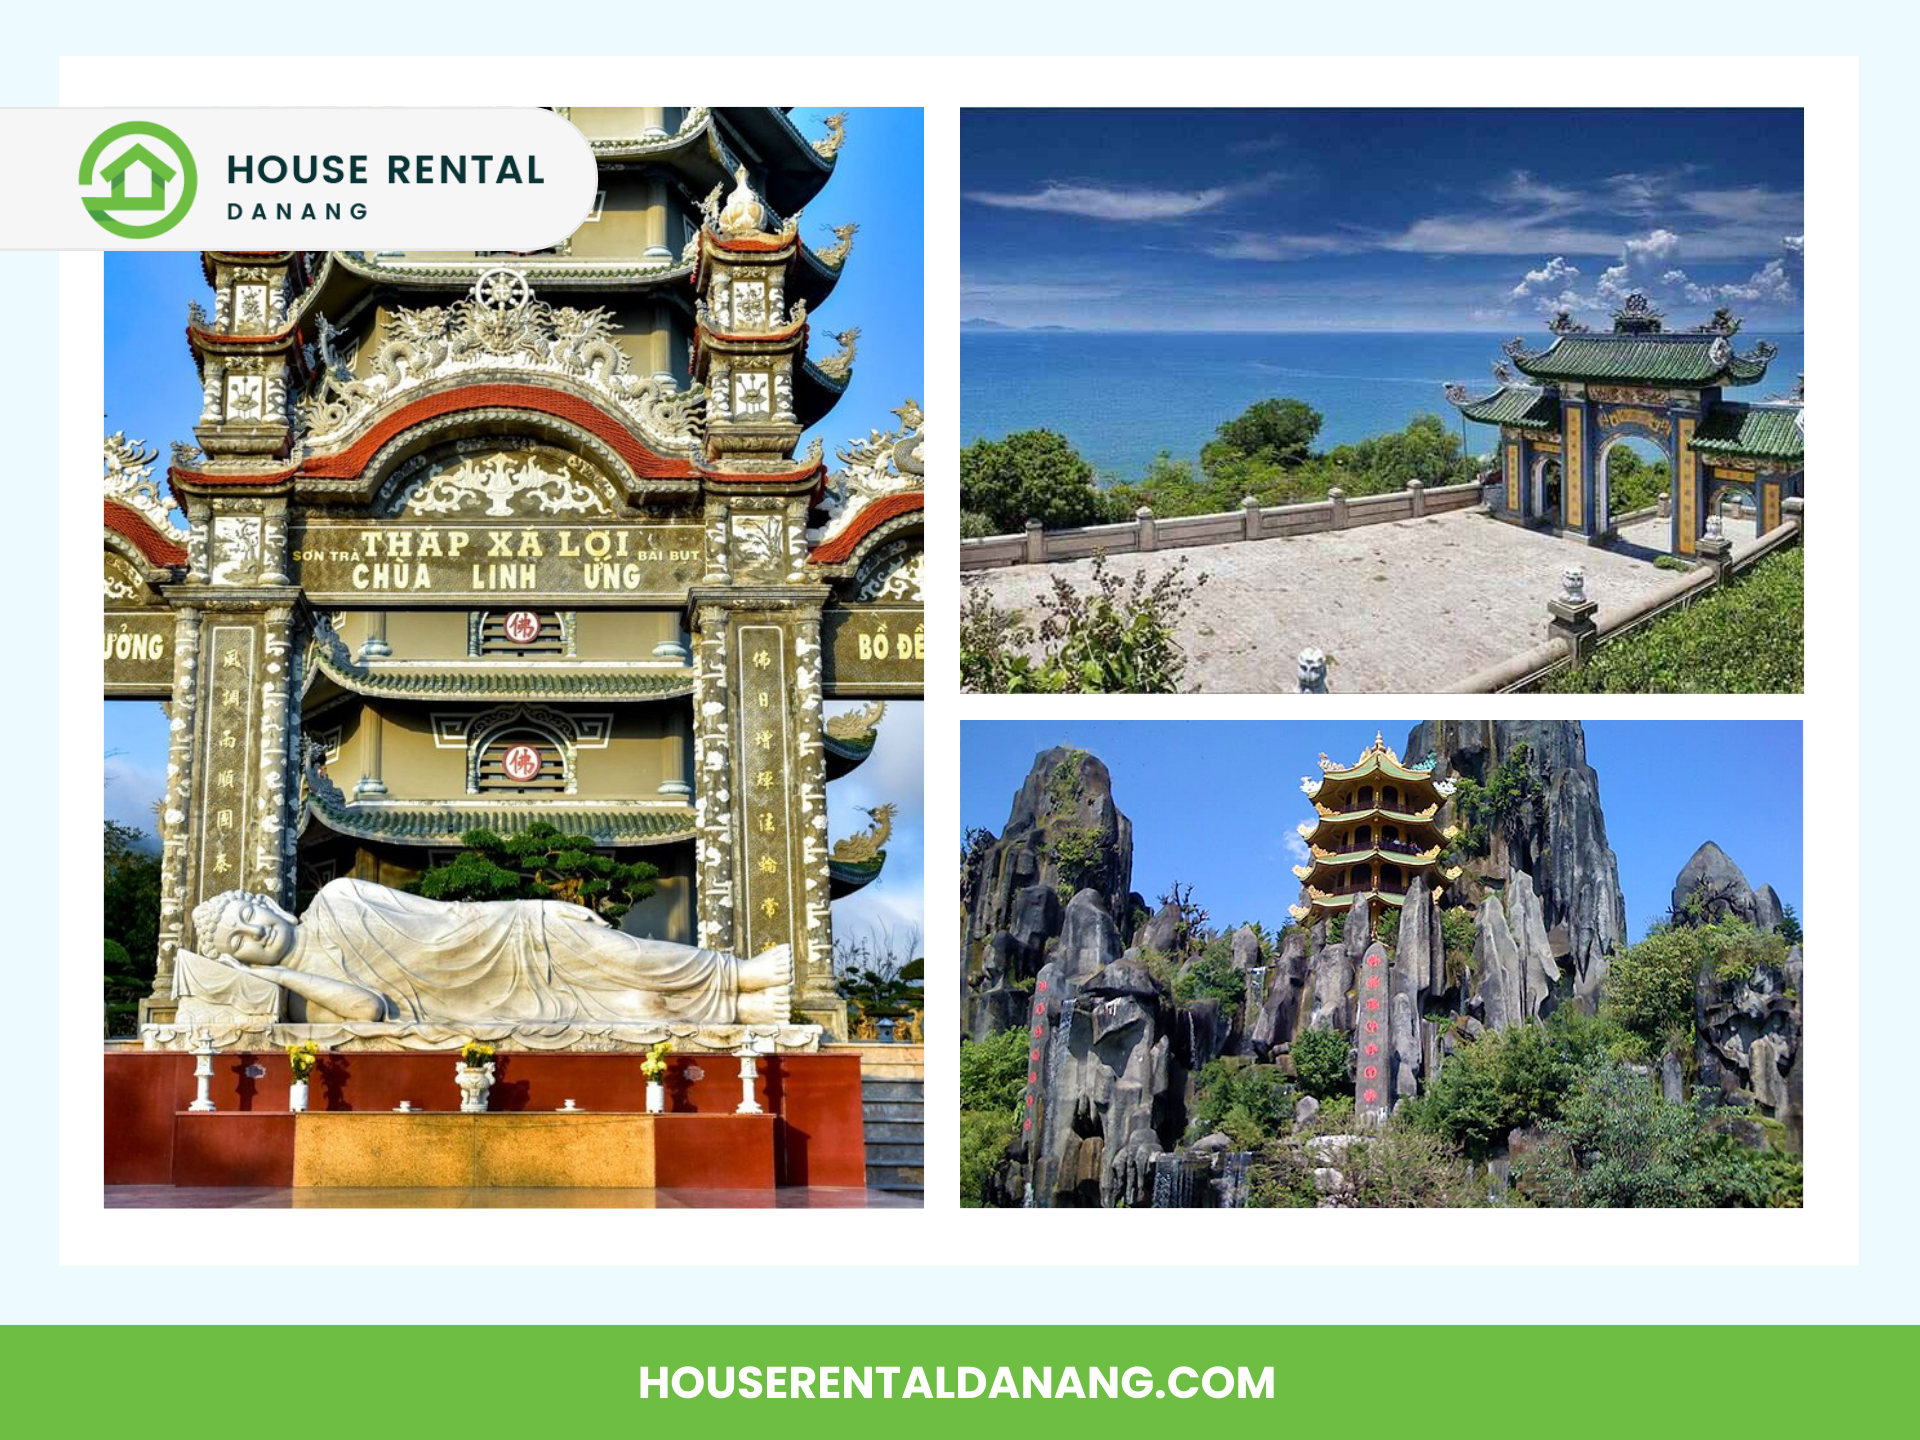 A collage features a Buddhist temple entrance, a scenic ocean view by a traditional gate, and a mountain with Linh Ung Pagoda. The image is labeled with "House Rental Danang" and the website "houserentaldanang.com.